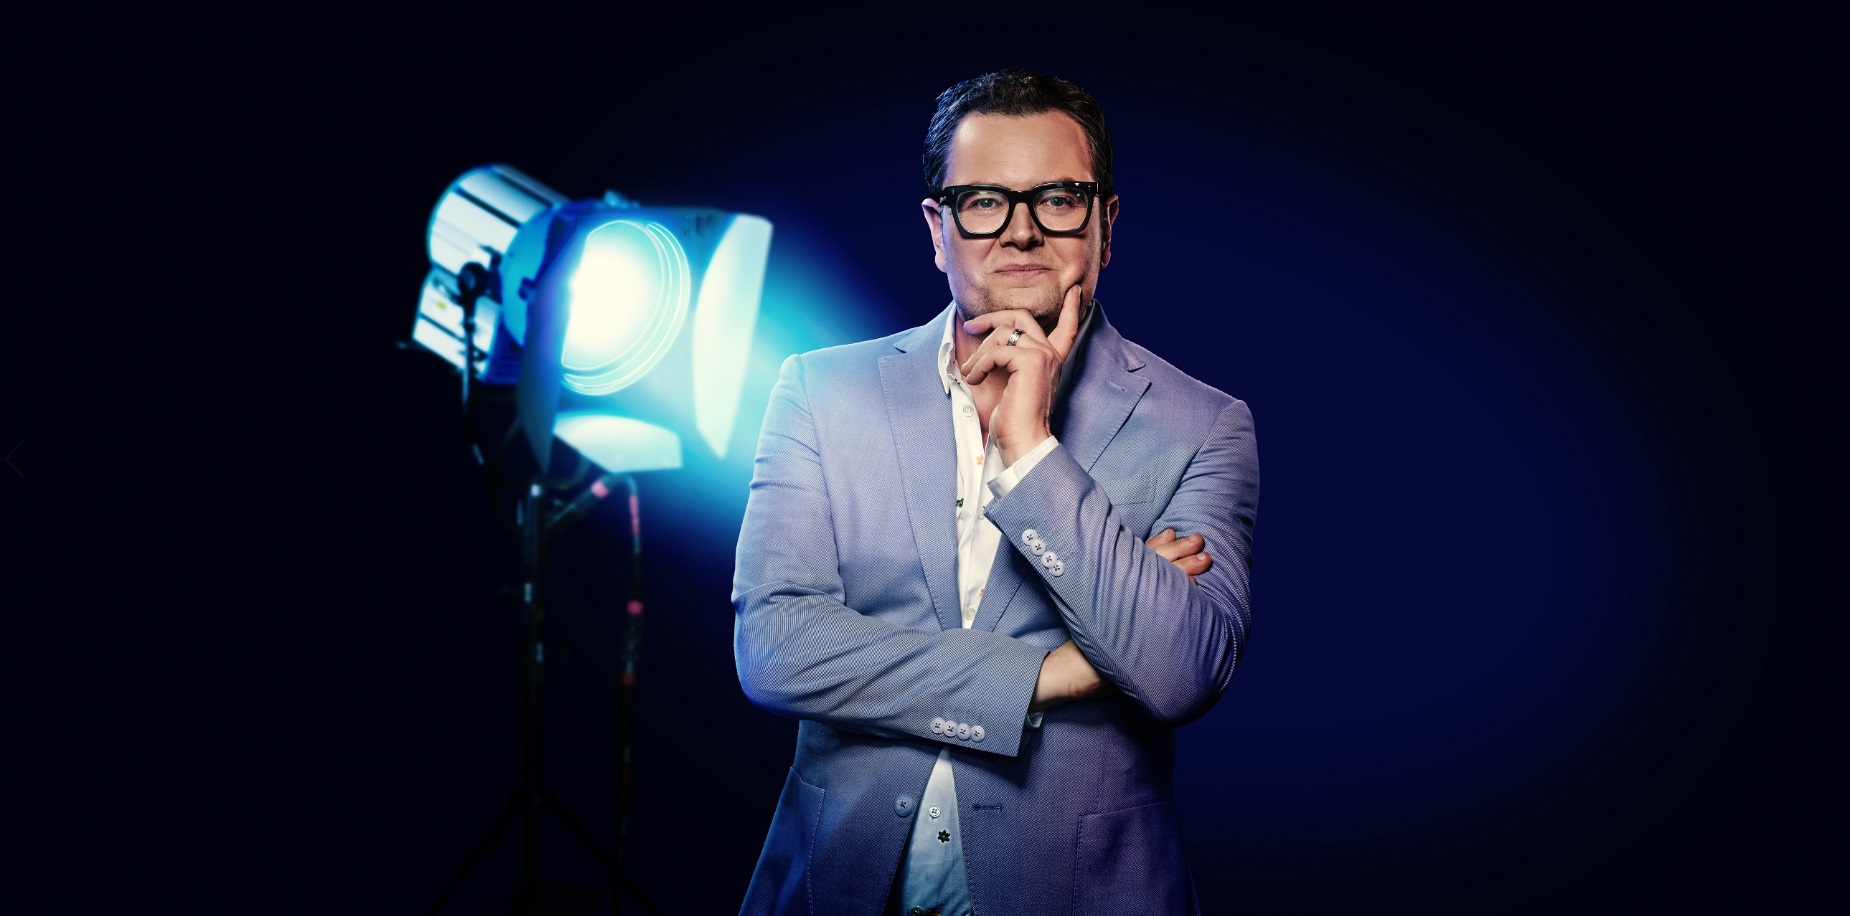 Alan Carr will host a new panel show